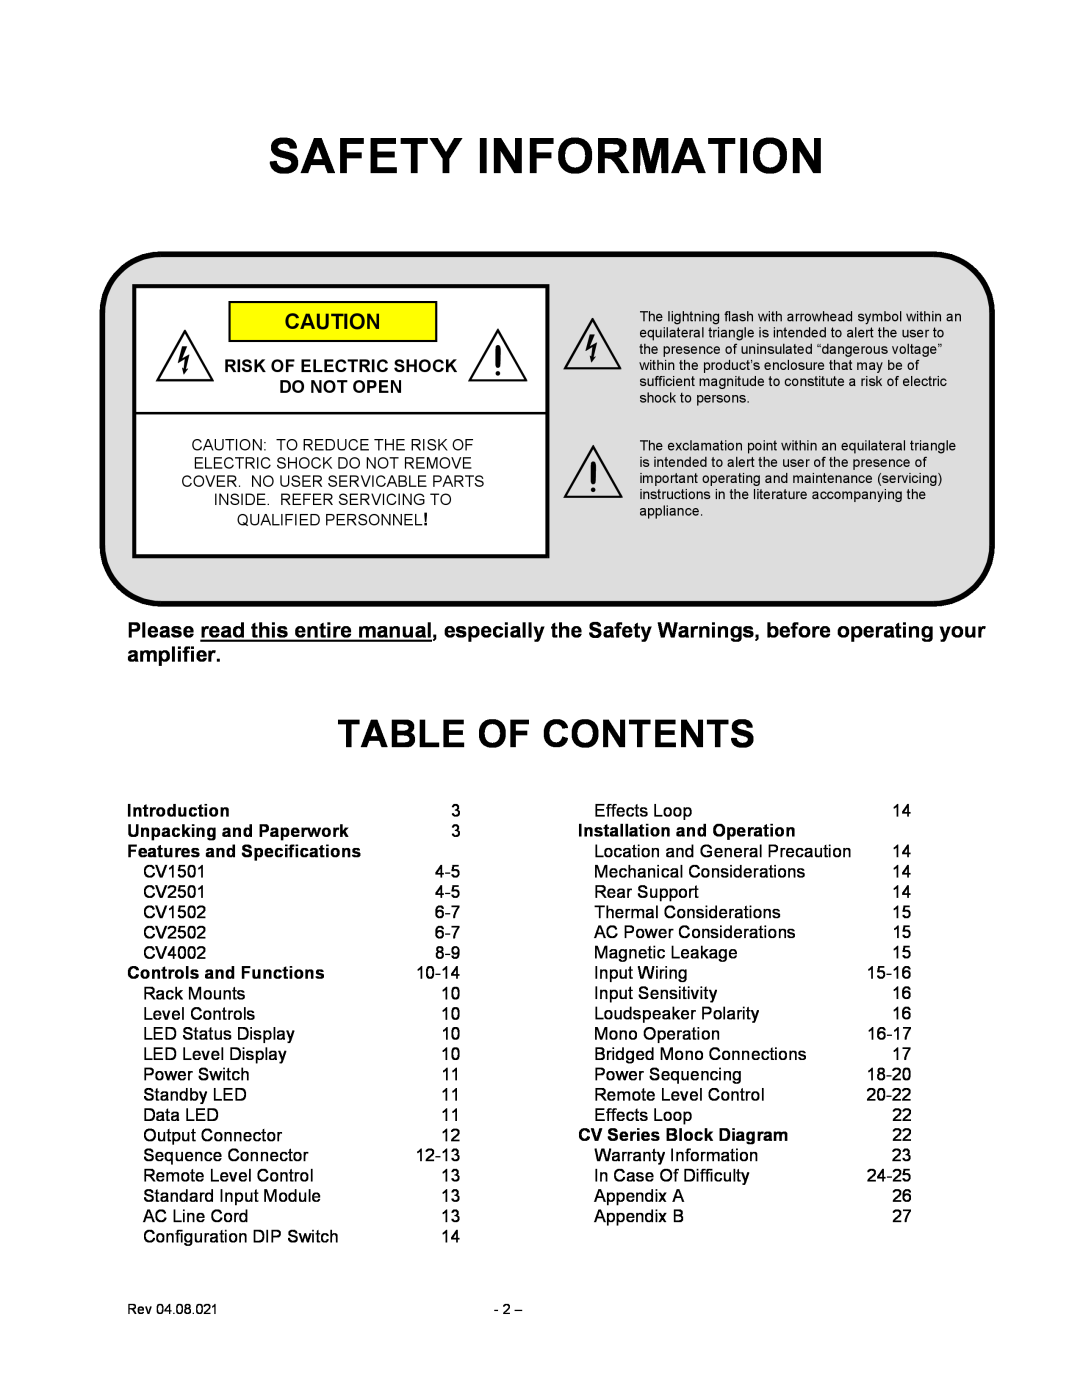 Carver CV Series user manual Table Of Contents, Safety Information, Risk Of Electric Shock, Do Not Open, Introduction 